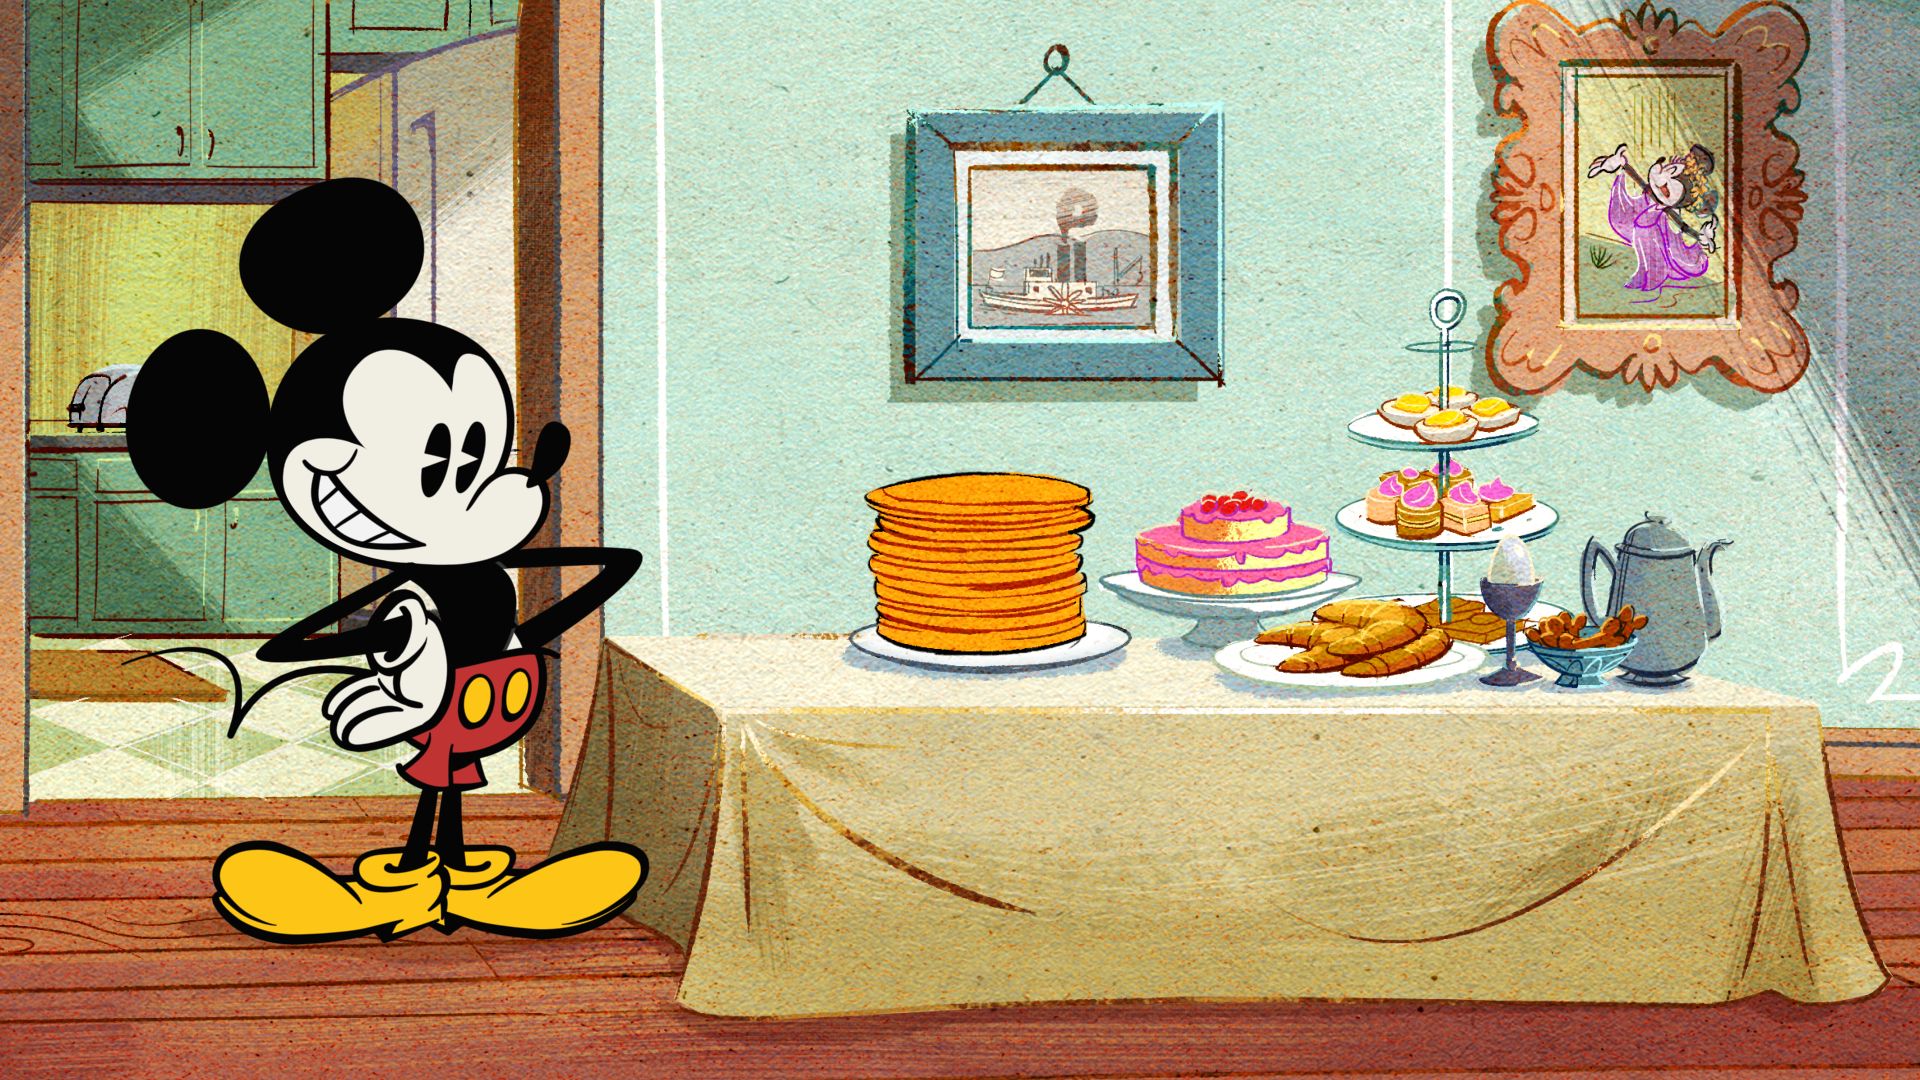 Mickey Mouse, standing near pancakes, in The Wonderful World of Mickey Mouse